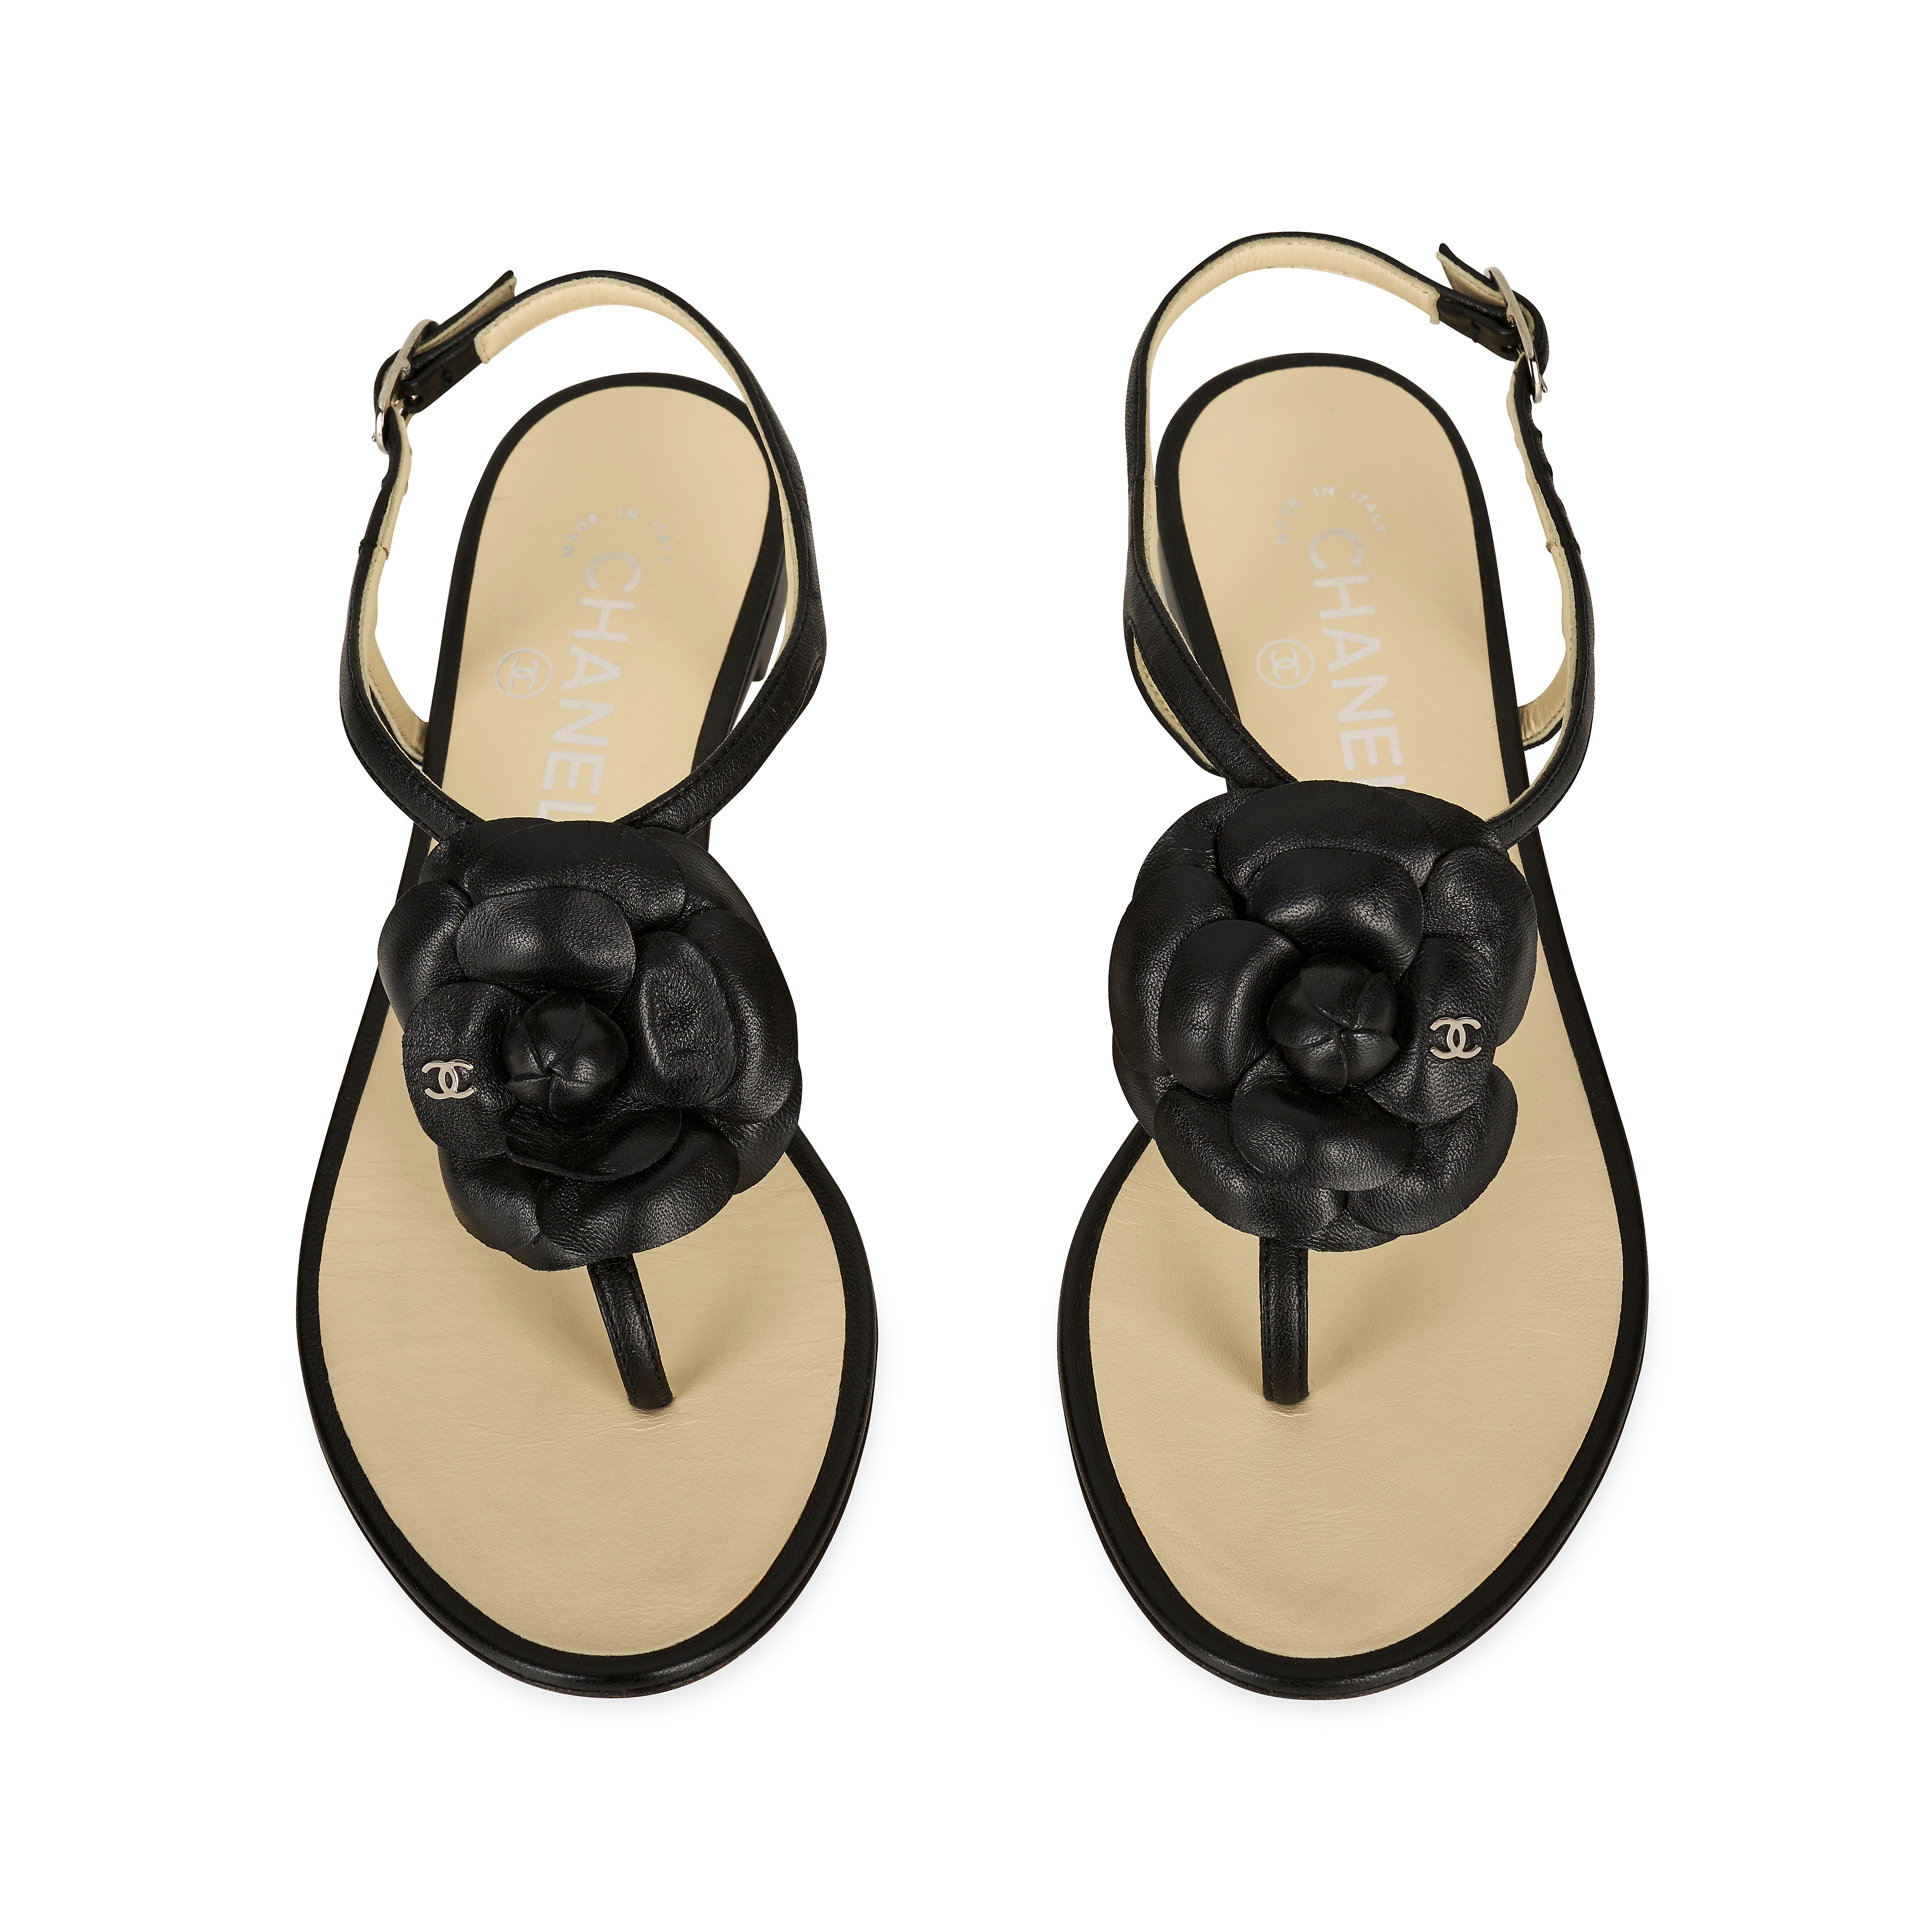 CHANEL CAMELLIA BEIGE AND BLACK SANDALS  Condition grade A-.  Size 37.5C. Black and beige leath... - Image 3 of 3